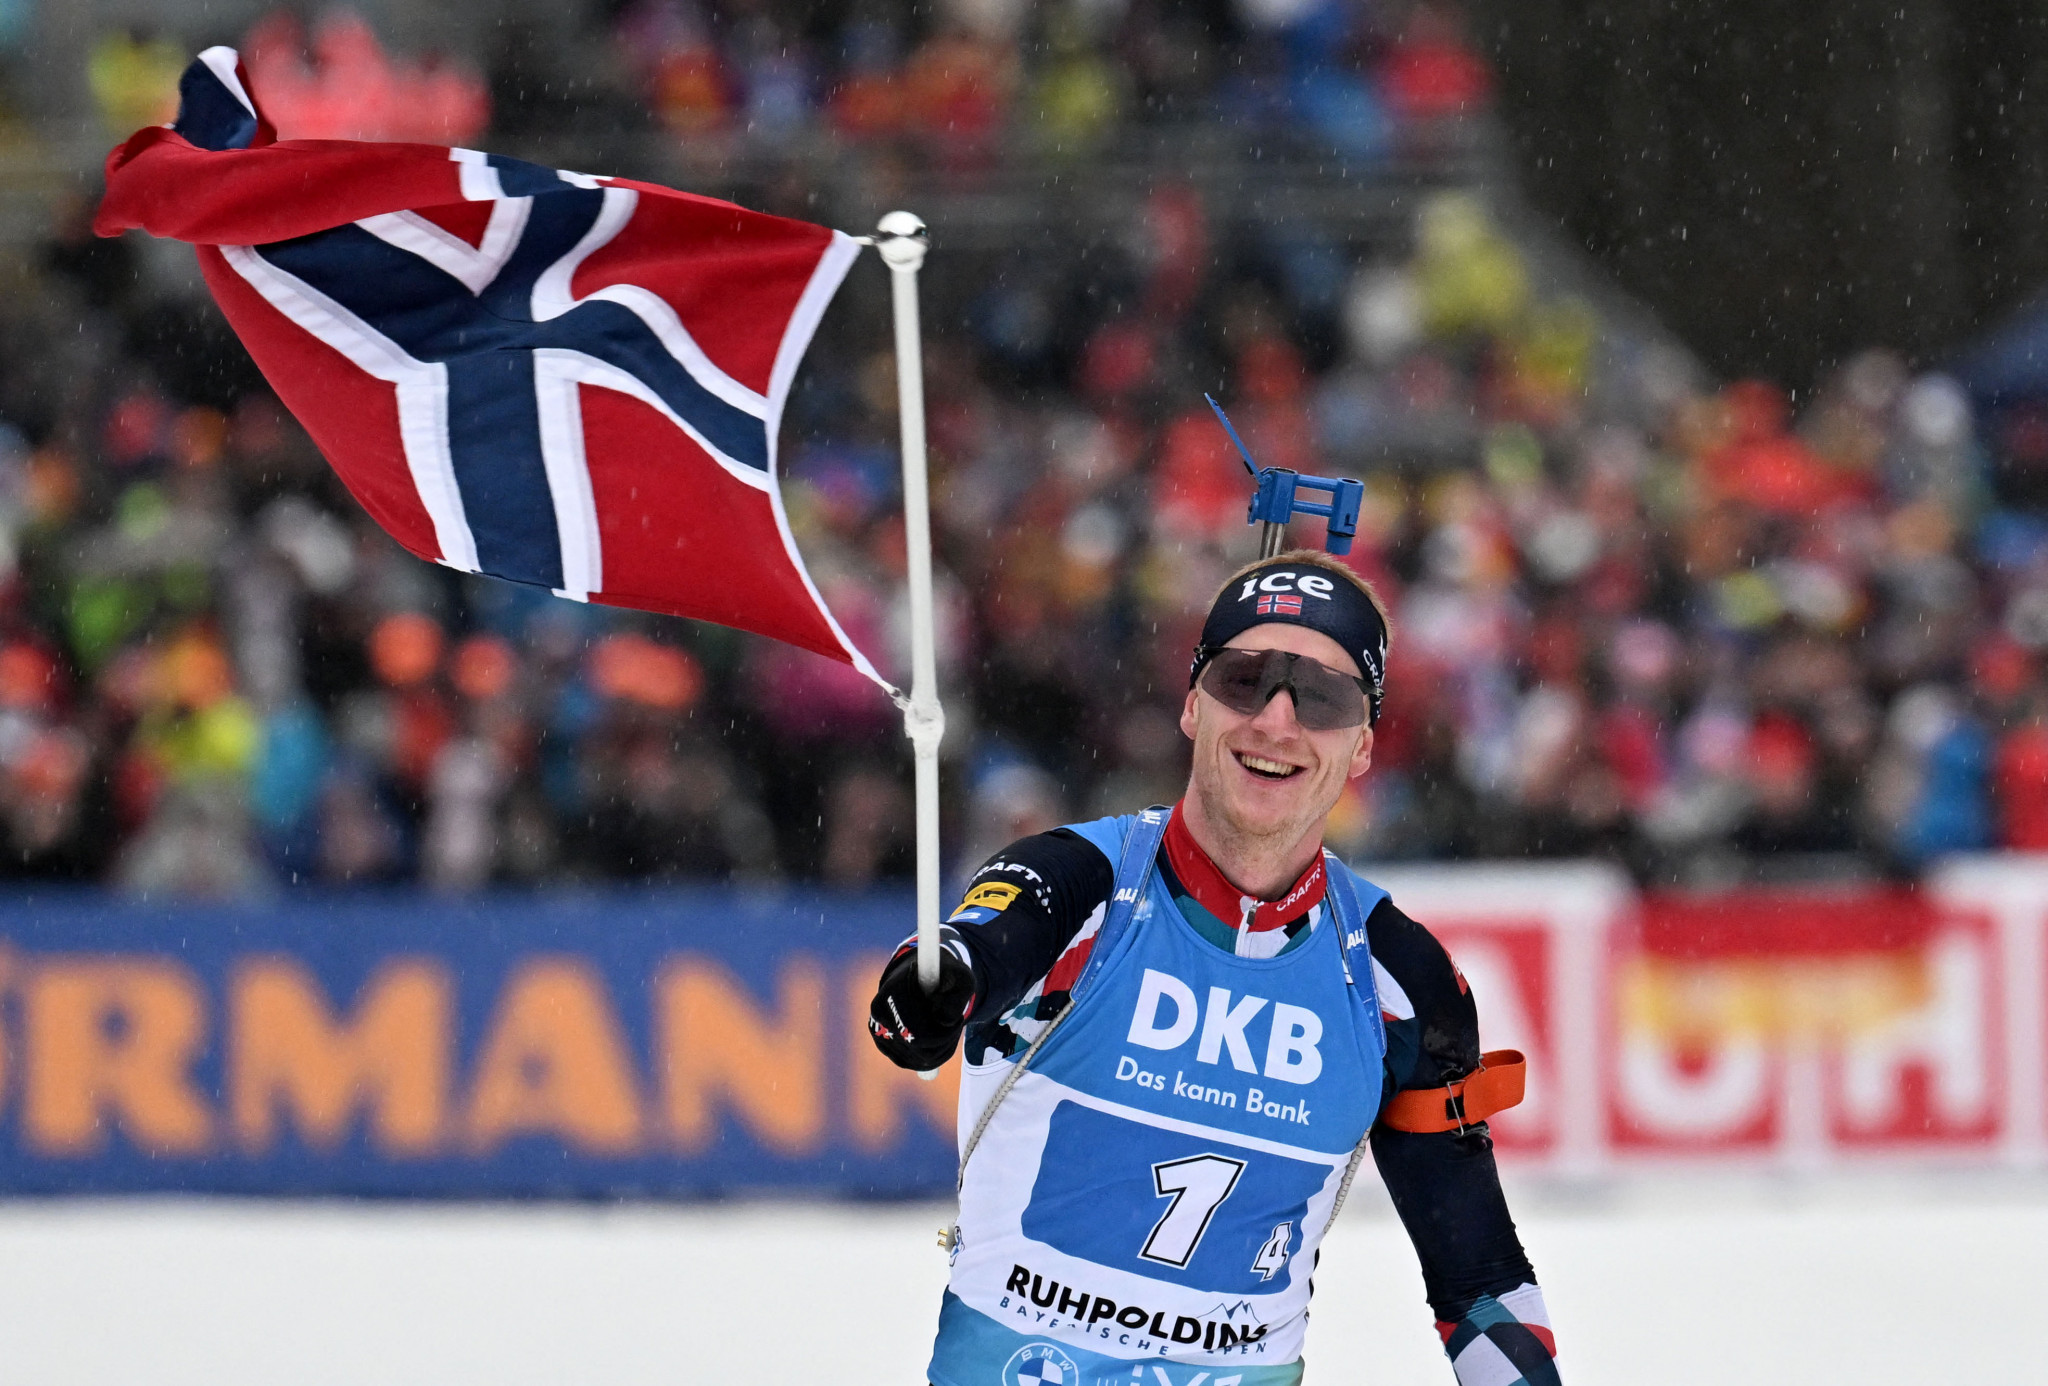 Norway win 4x7.5km relay for sixth consecutive IBU World Cup after recovering from early penalty